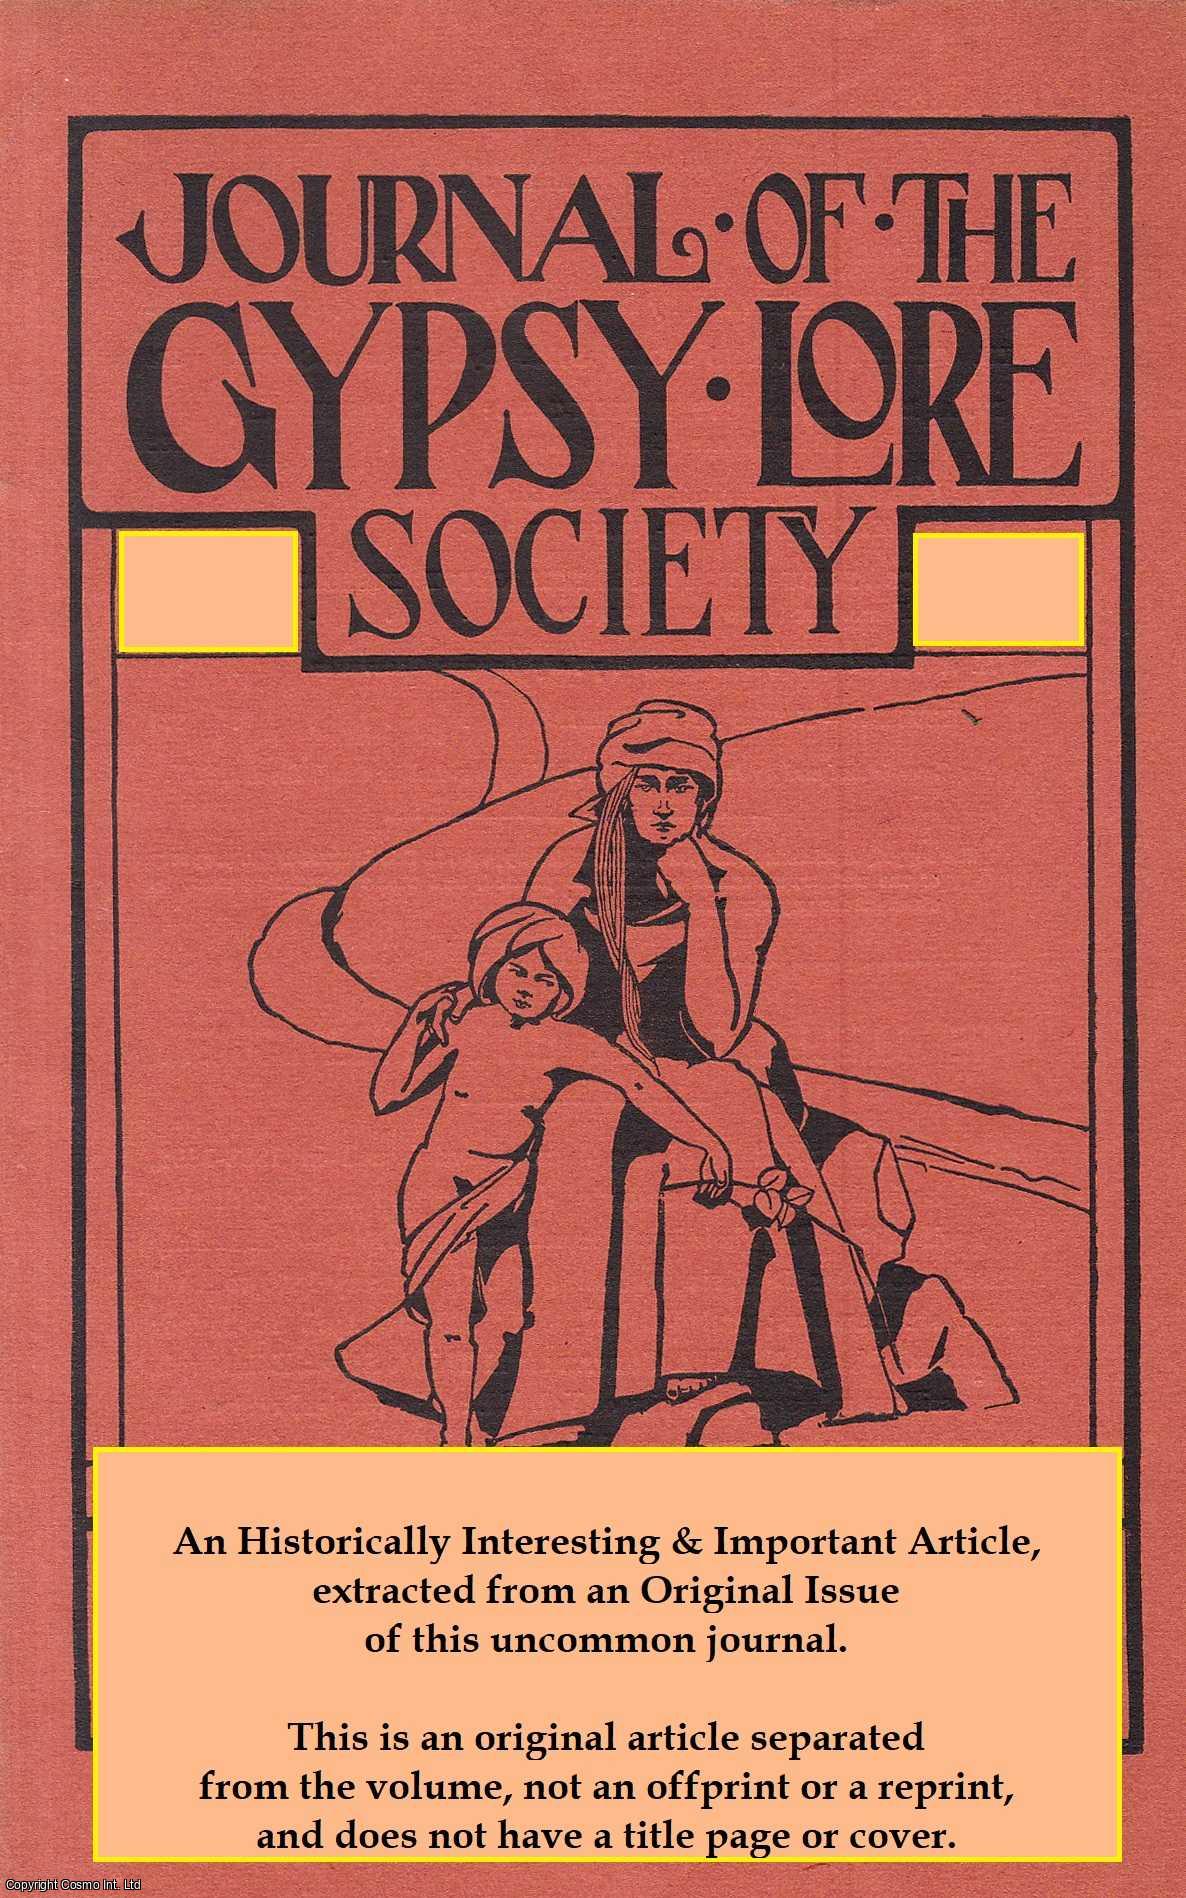 S. Mervyn Jones - Isaac Vincent Boss. An uncommon original article from the Journal of the Gypsy Lore Society, 1966.